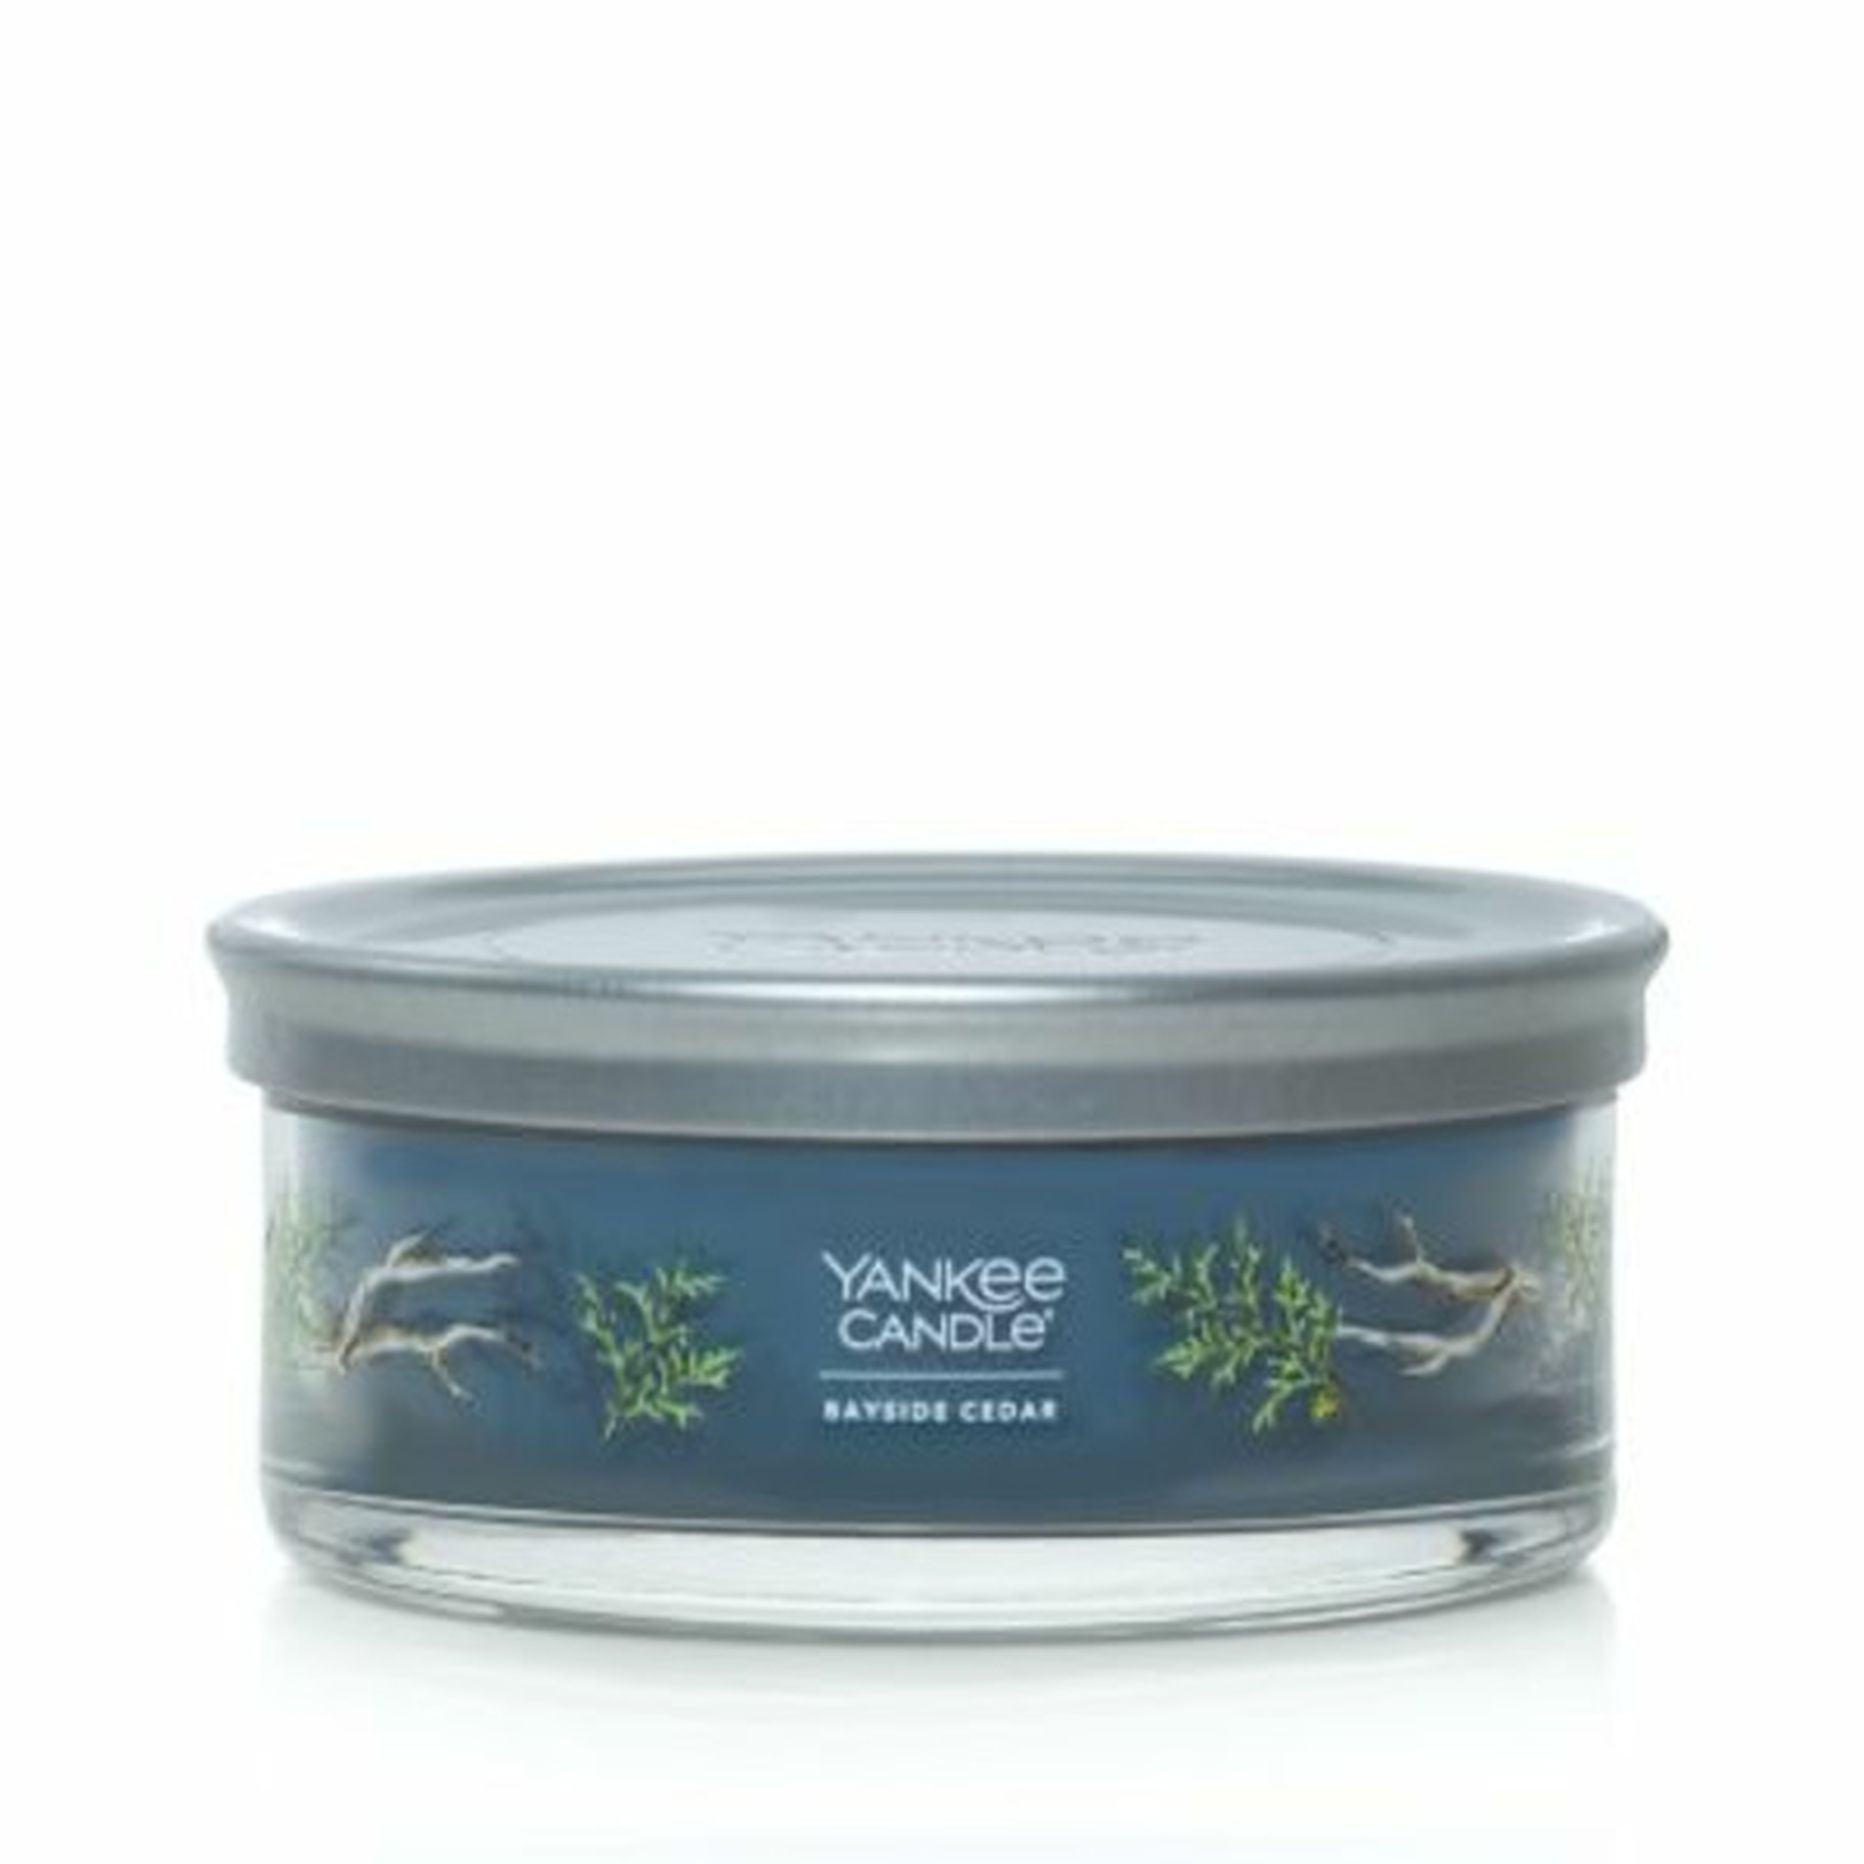 Yankee Candle Bayside Cedar Signature Collection 5-Wick Tumbler Candle ...